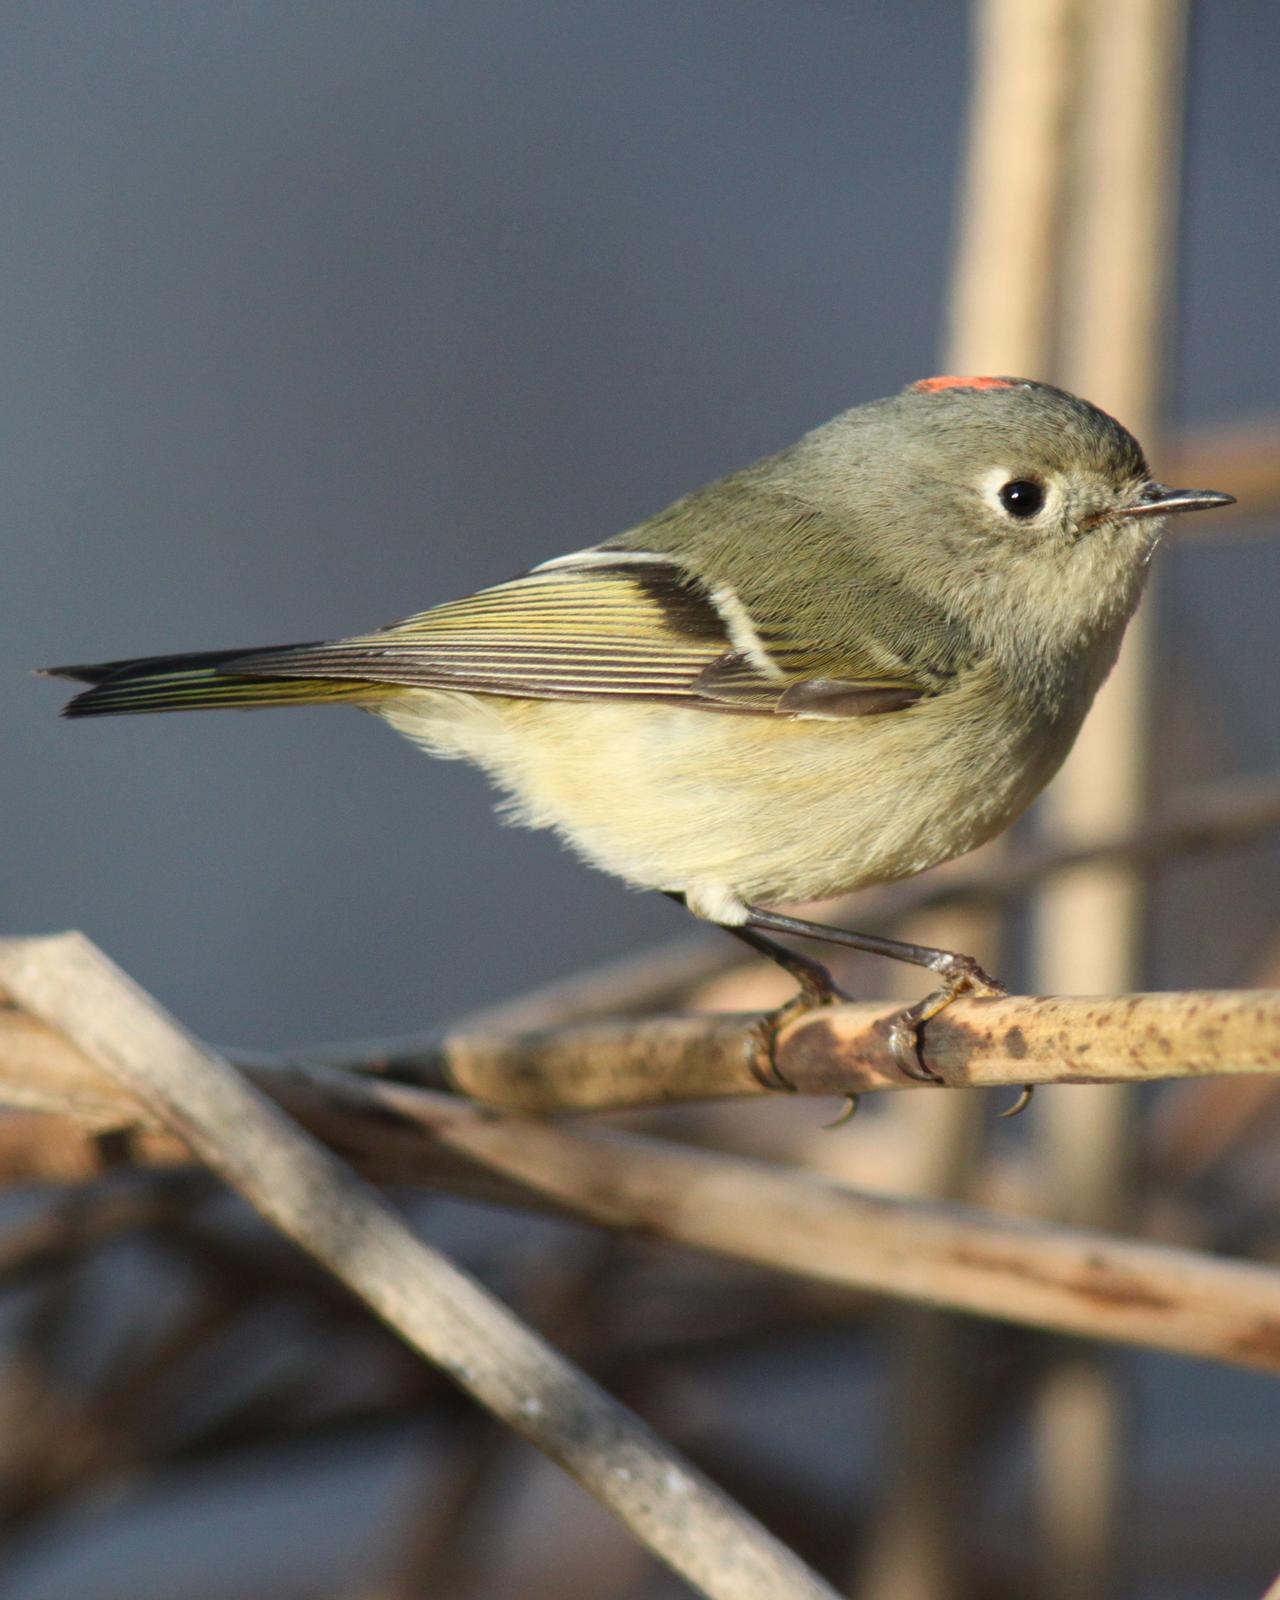 Ruby-crowned Kinglet Photo by Kimberly Perkins 2013